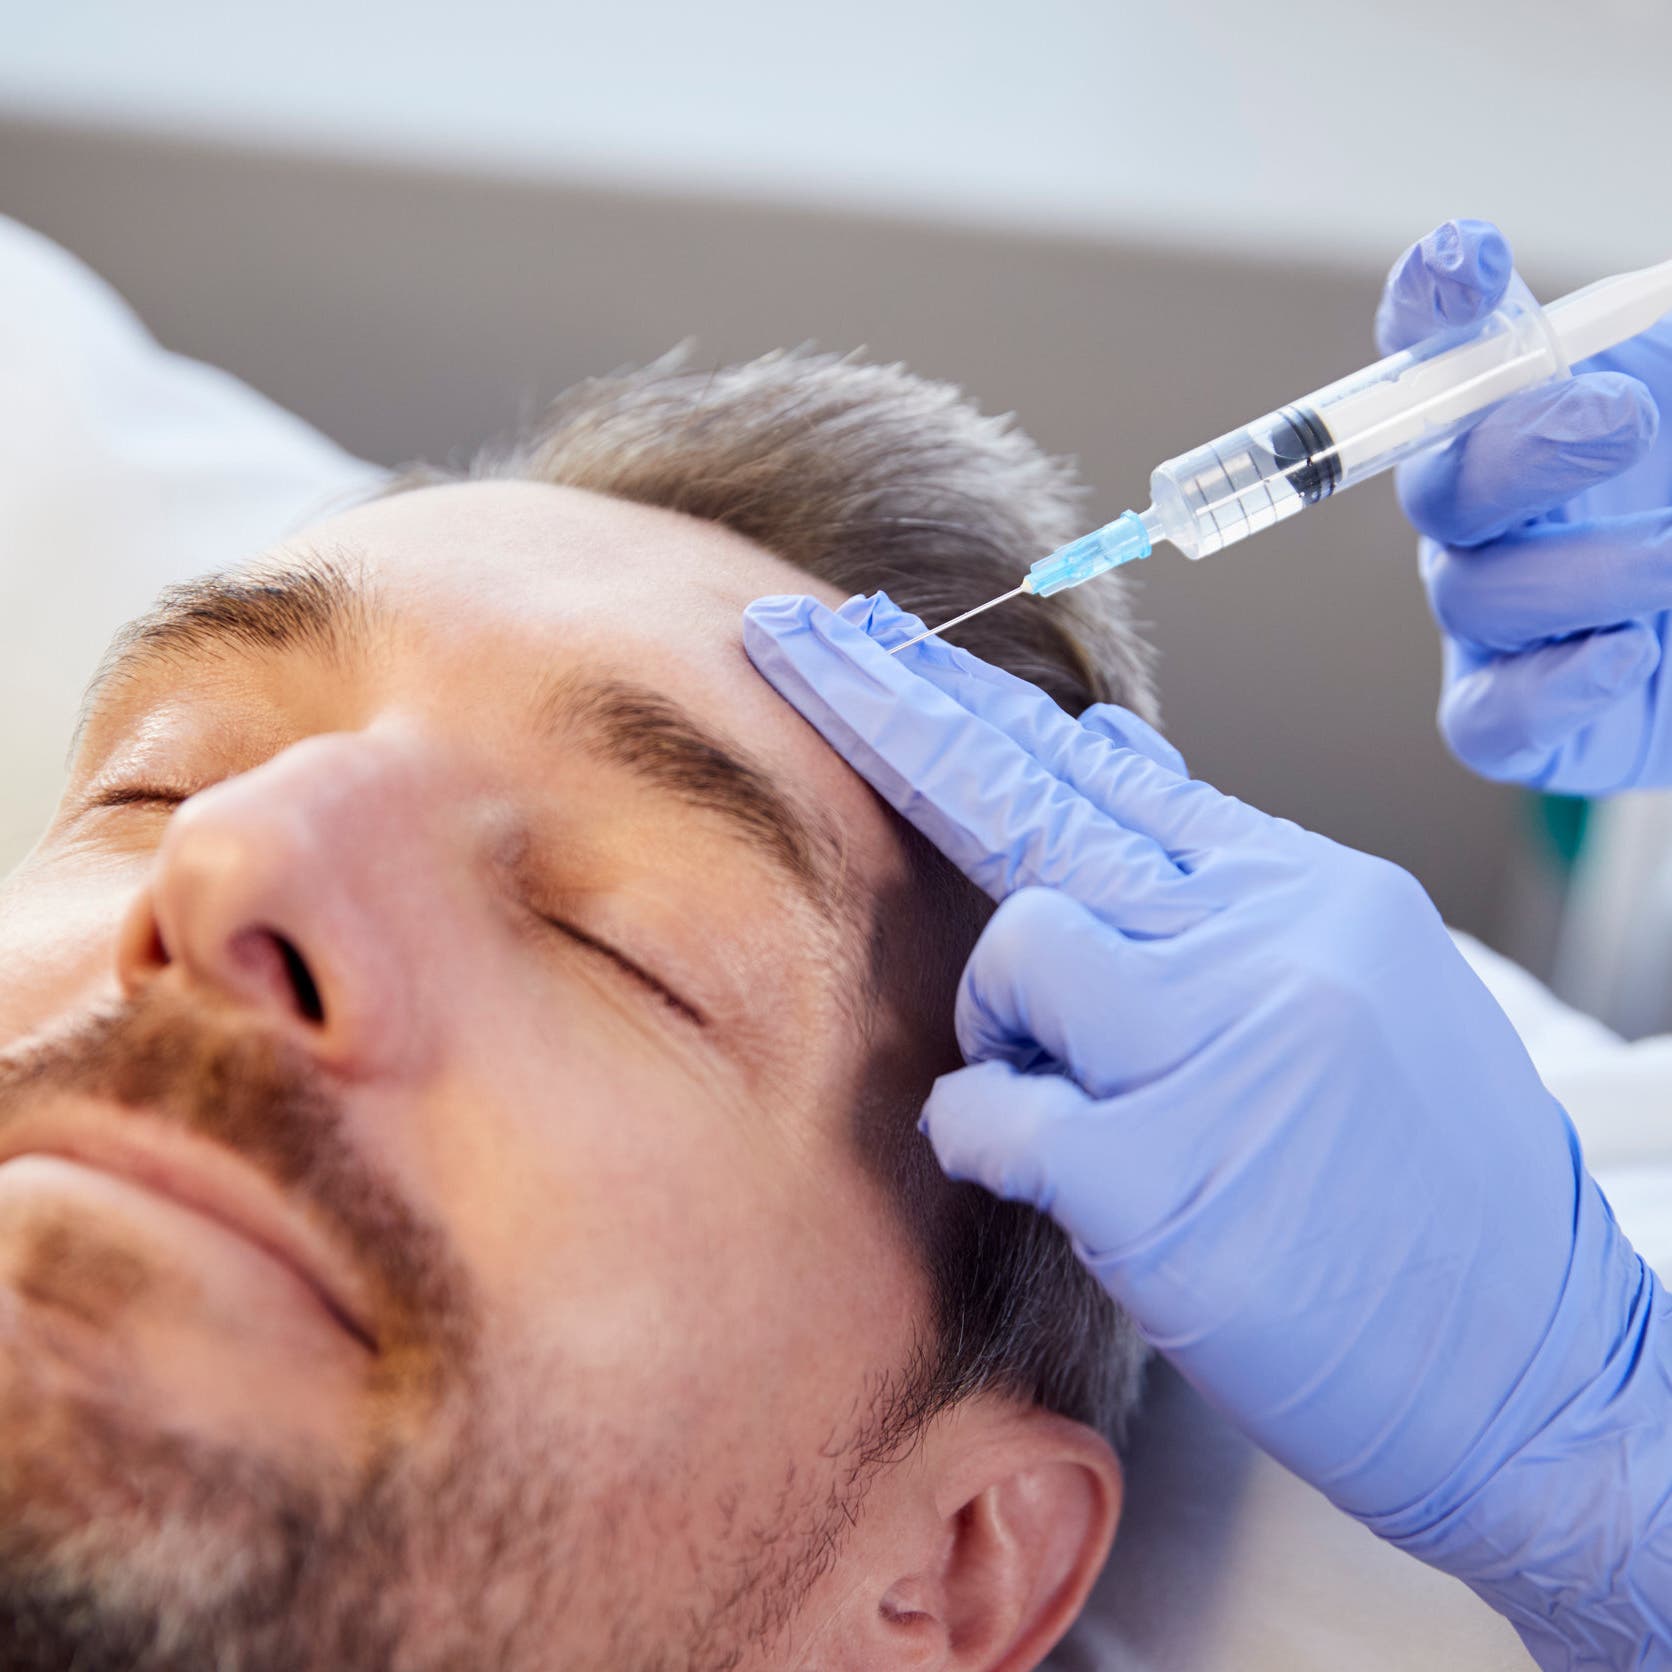 Fillers to Botox: Dubai clinics record surge in men opting for cosmetic procedures